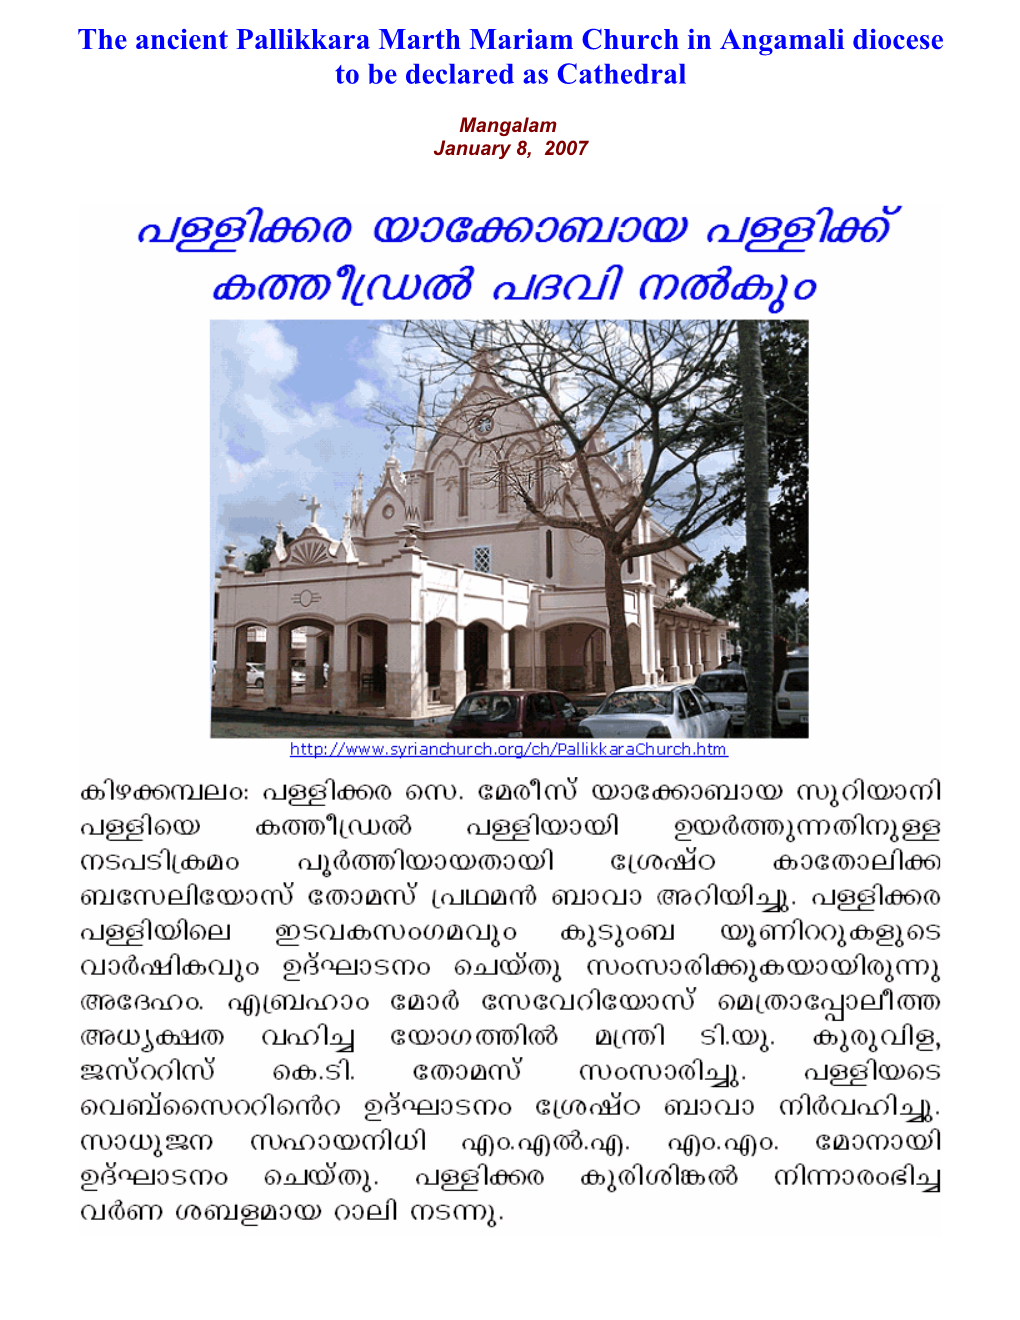 The Ancient Pallikkara Marth Mariam Church in Angamali Diocese to Be Declared As Cathedral